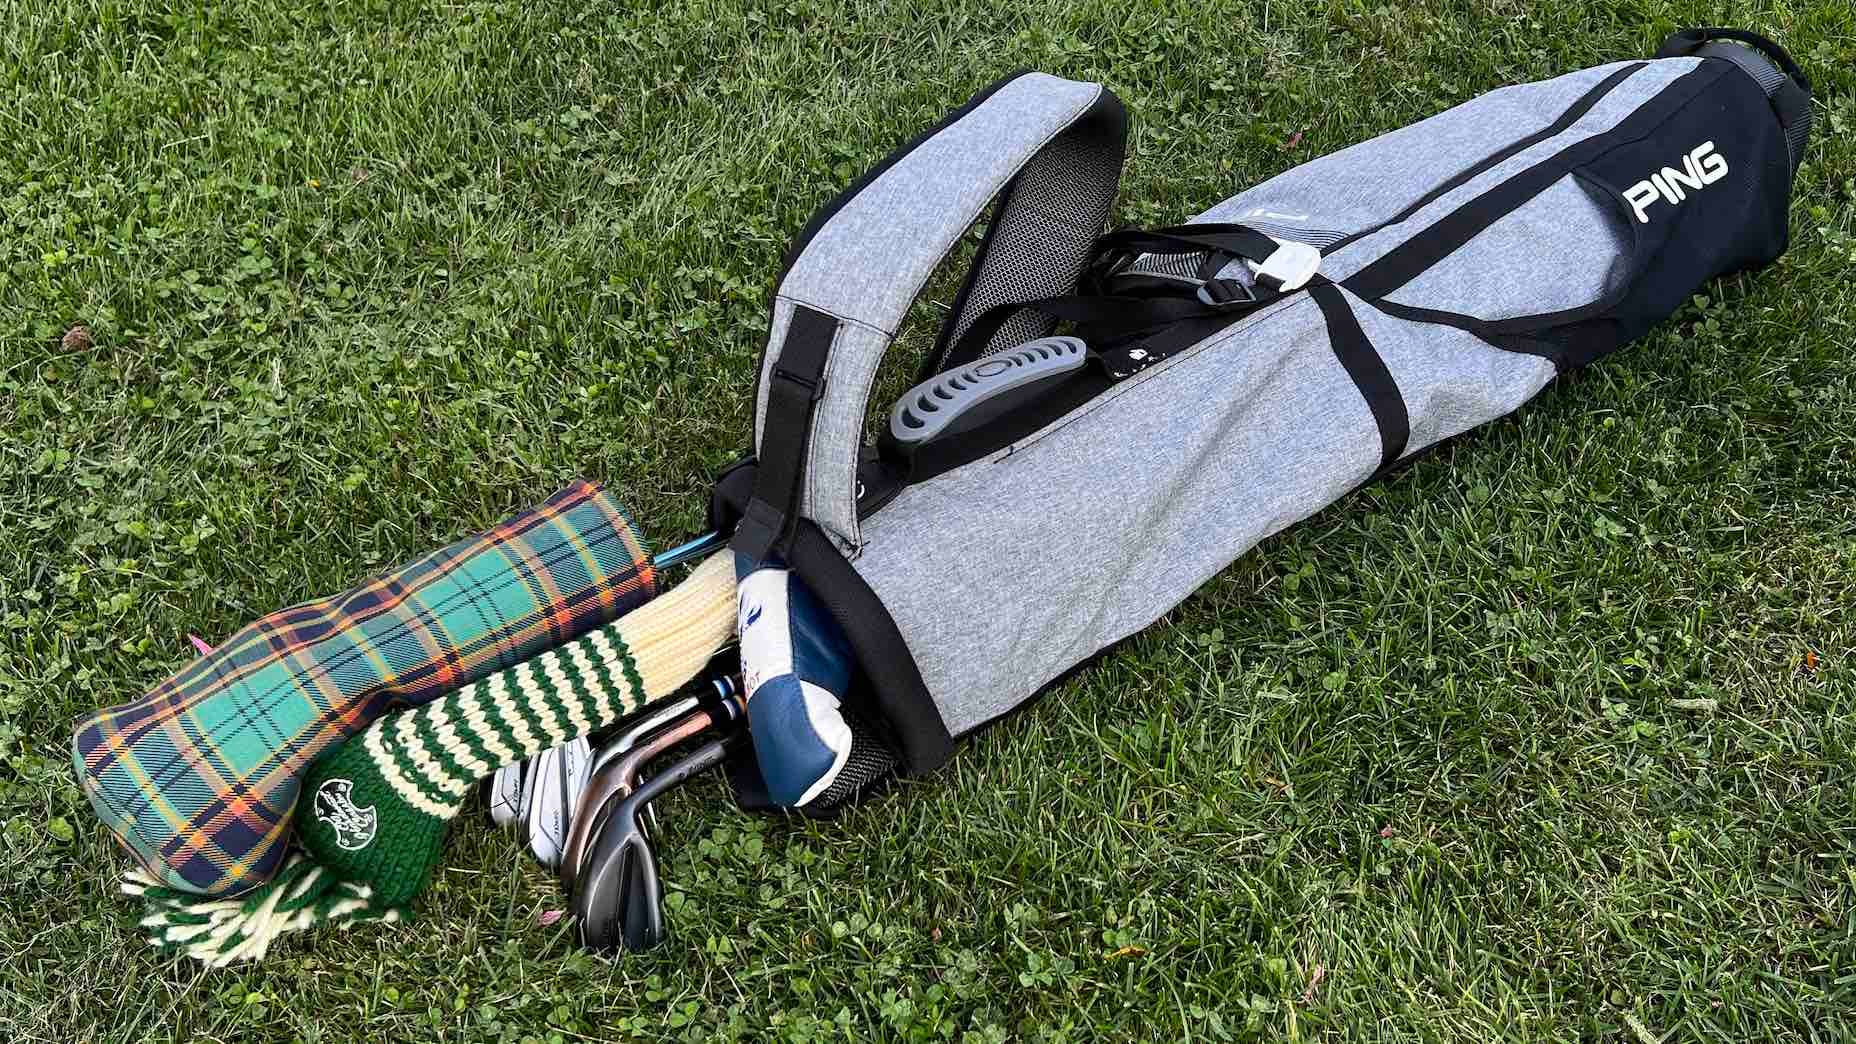 This Is The World's Smallest Golf Bag